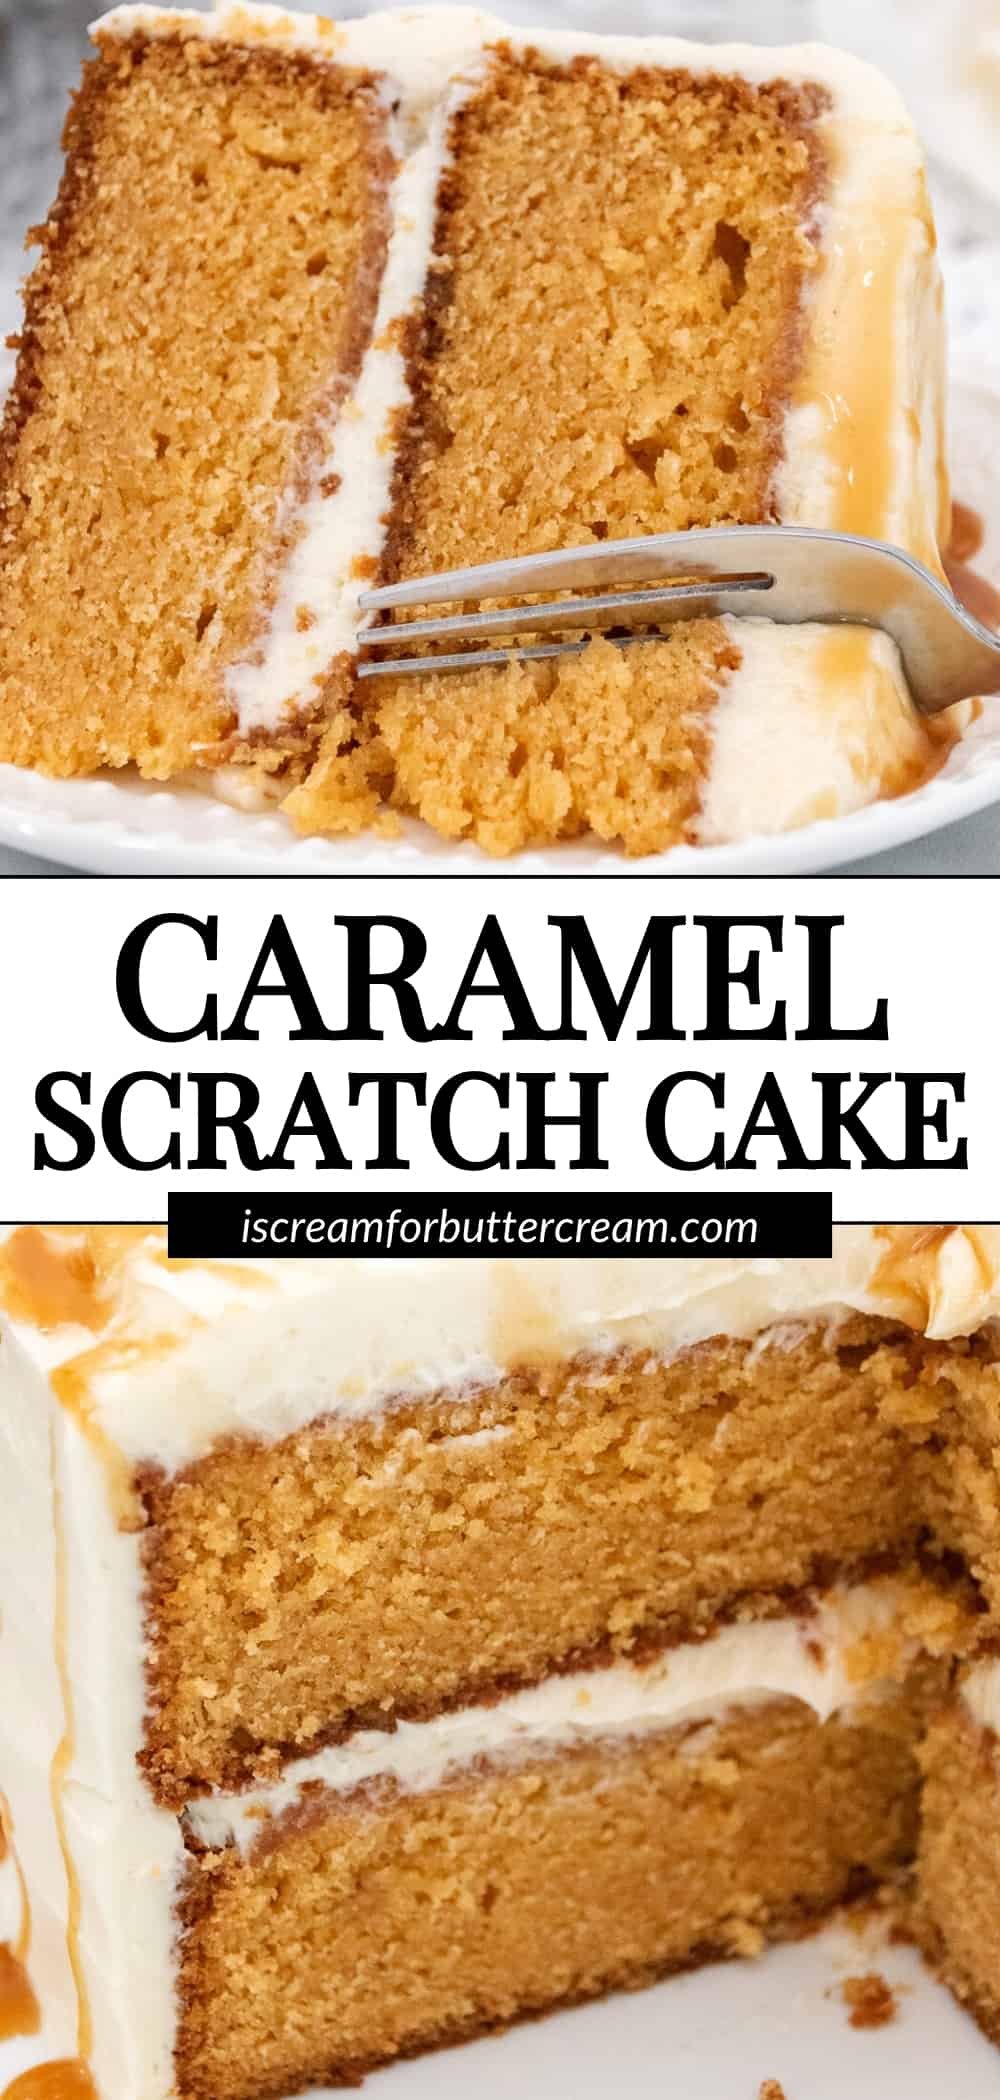 Caramel cake by scratch pinterest pin with text overlay and slices of caramel cake on a white plate and cake platter.